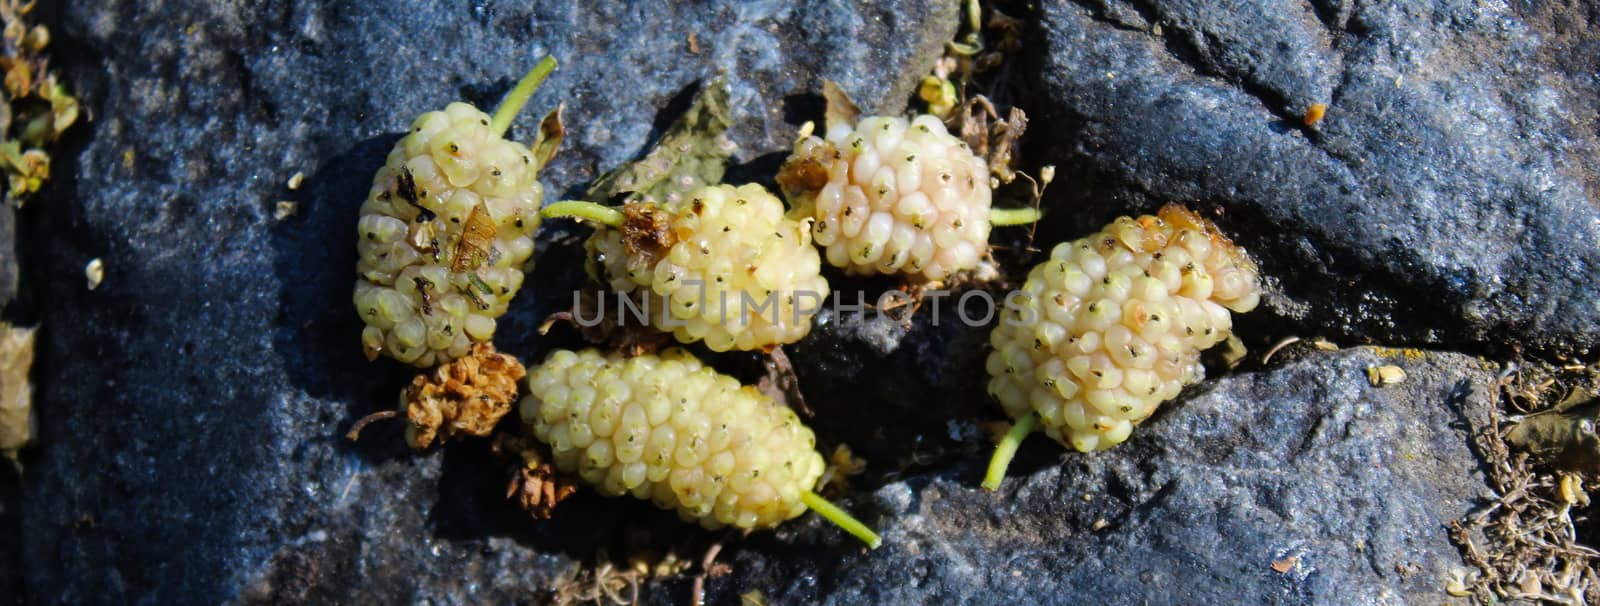 A banner of five white mulberry fruits against a dark blue stone background. Morus alba, white mulberry. Beja, Portugal.